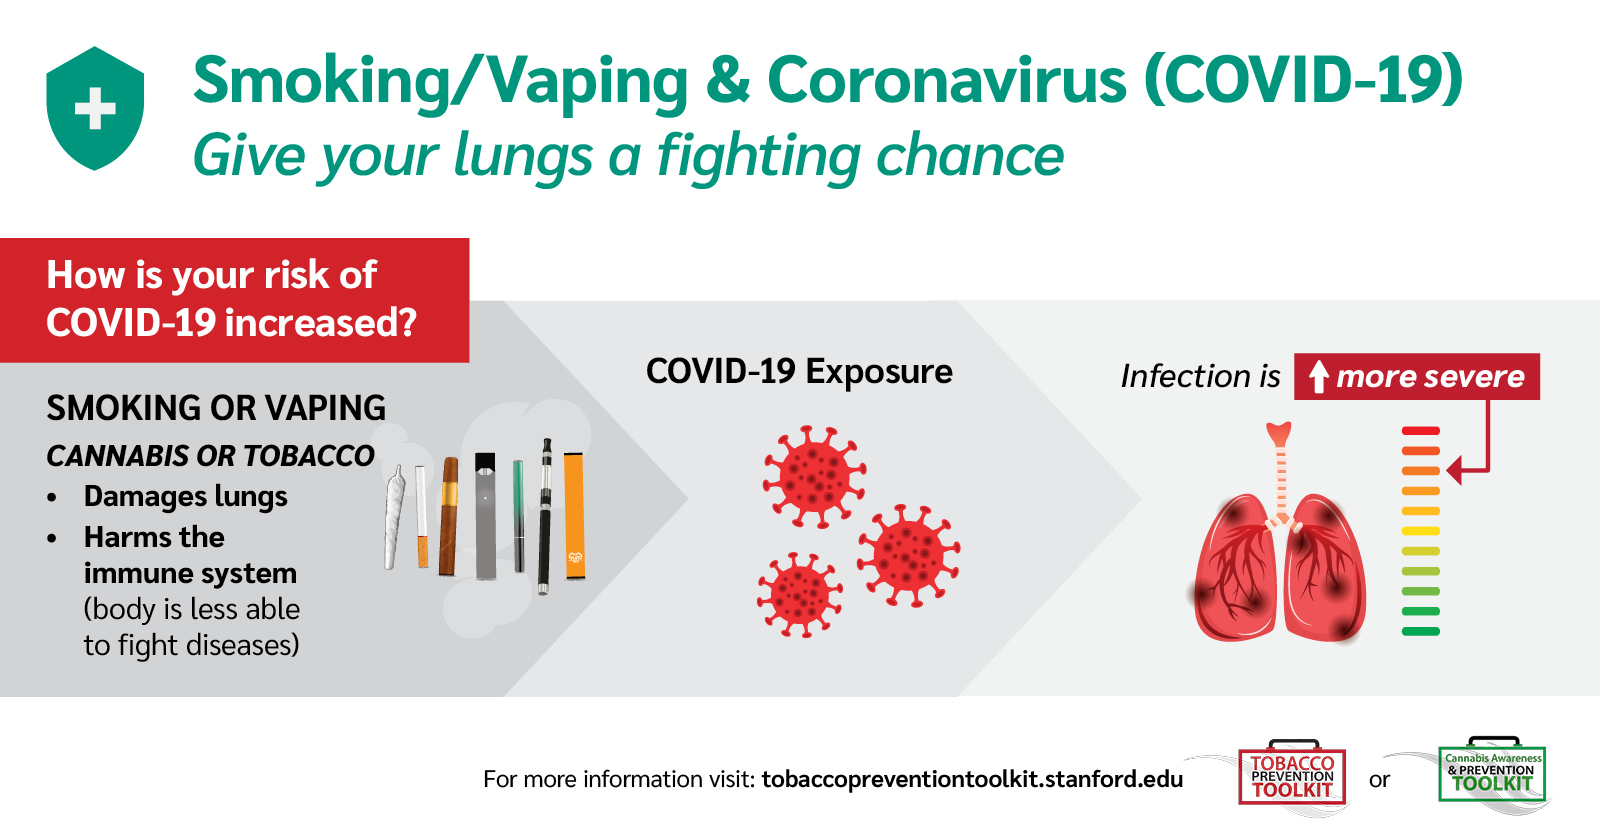 Smoking/Vaping and Coronavirus: Give your lungs a fighting chance